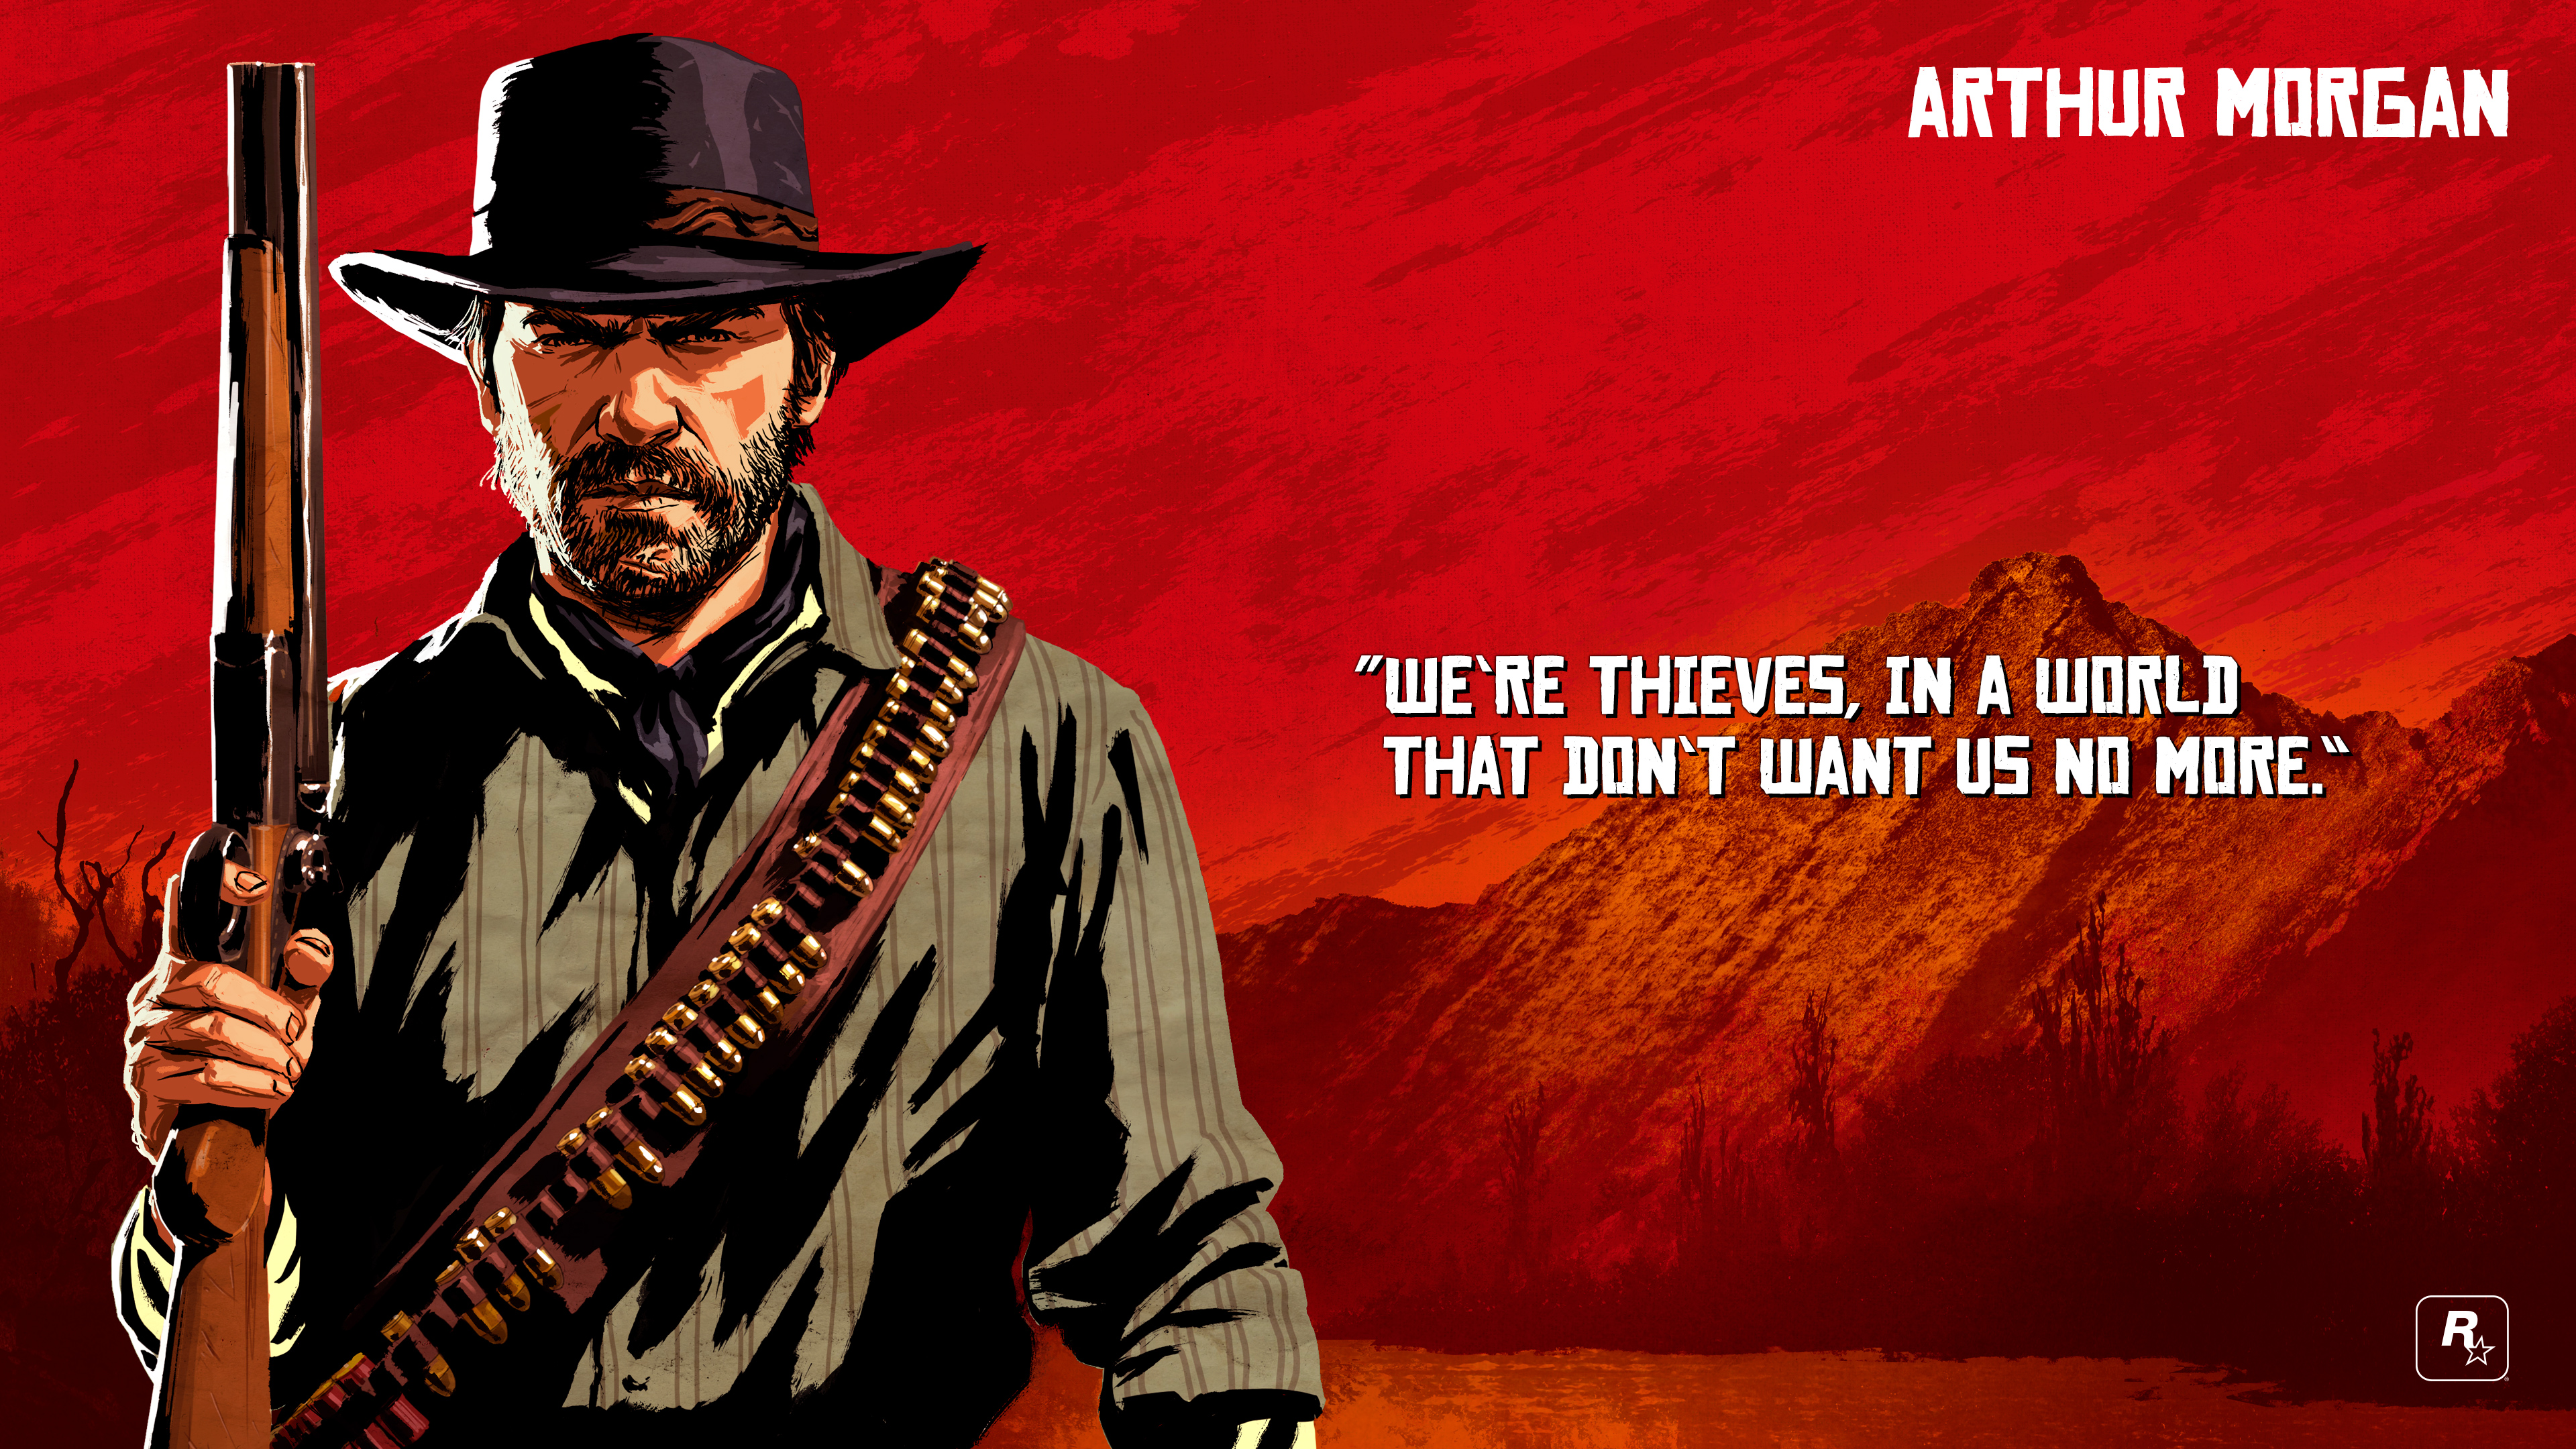 red dead redemption 2, arthur morgan, video game, red dead